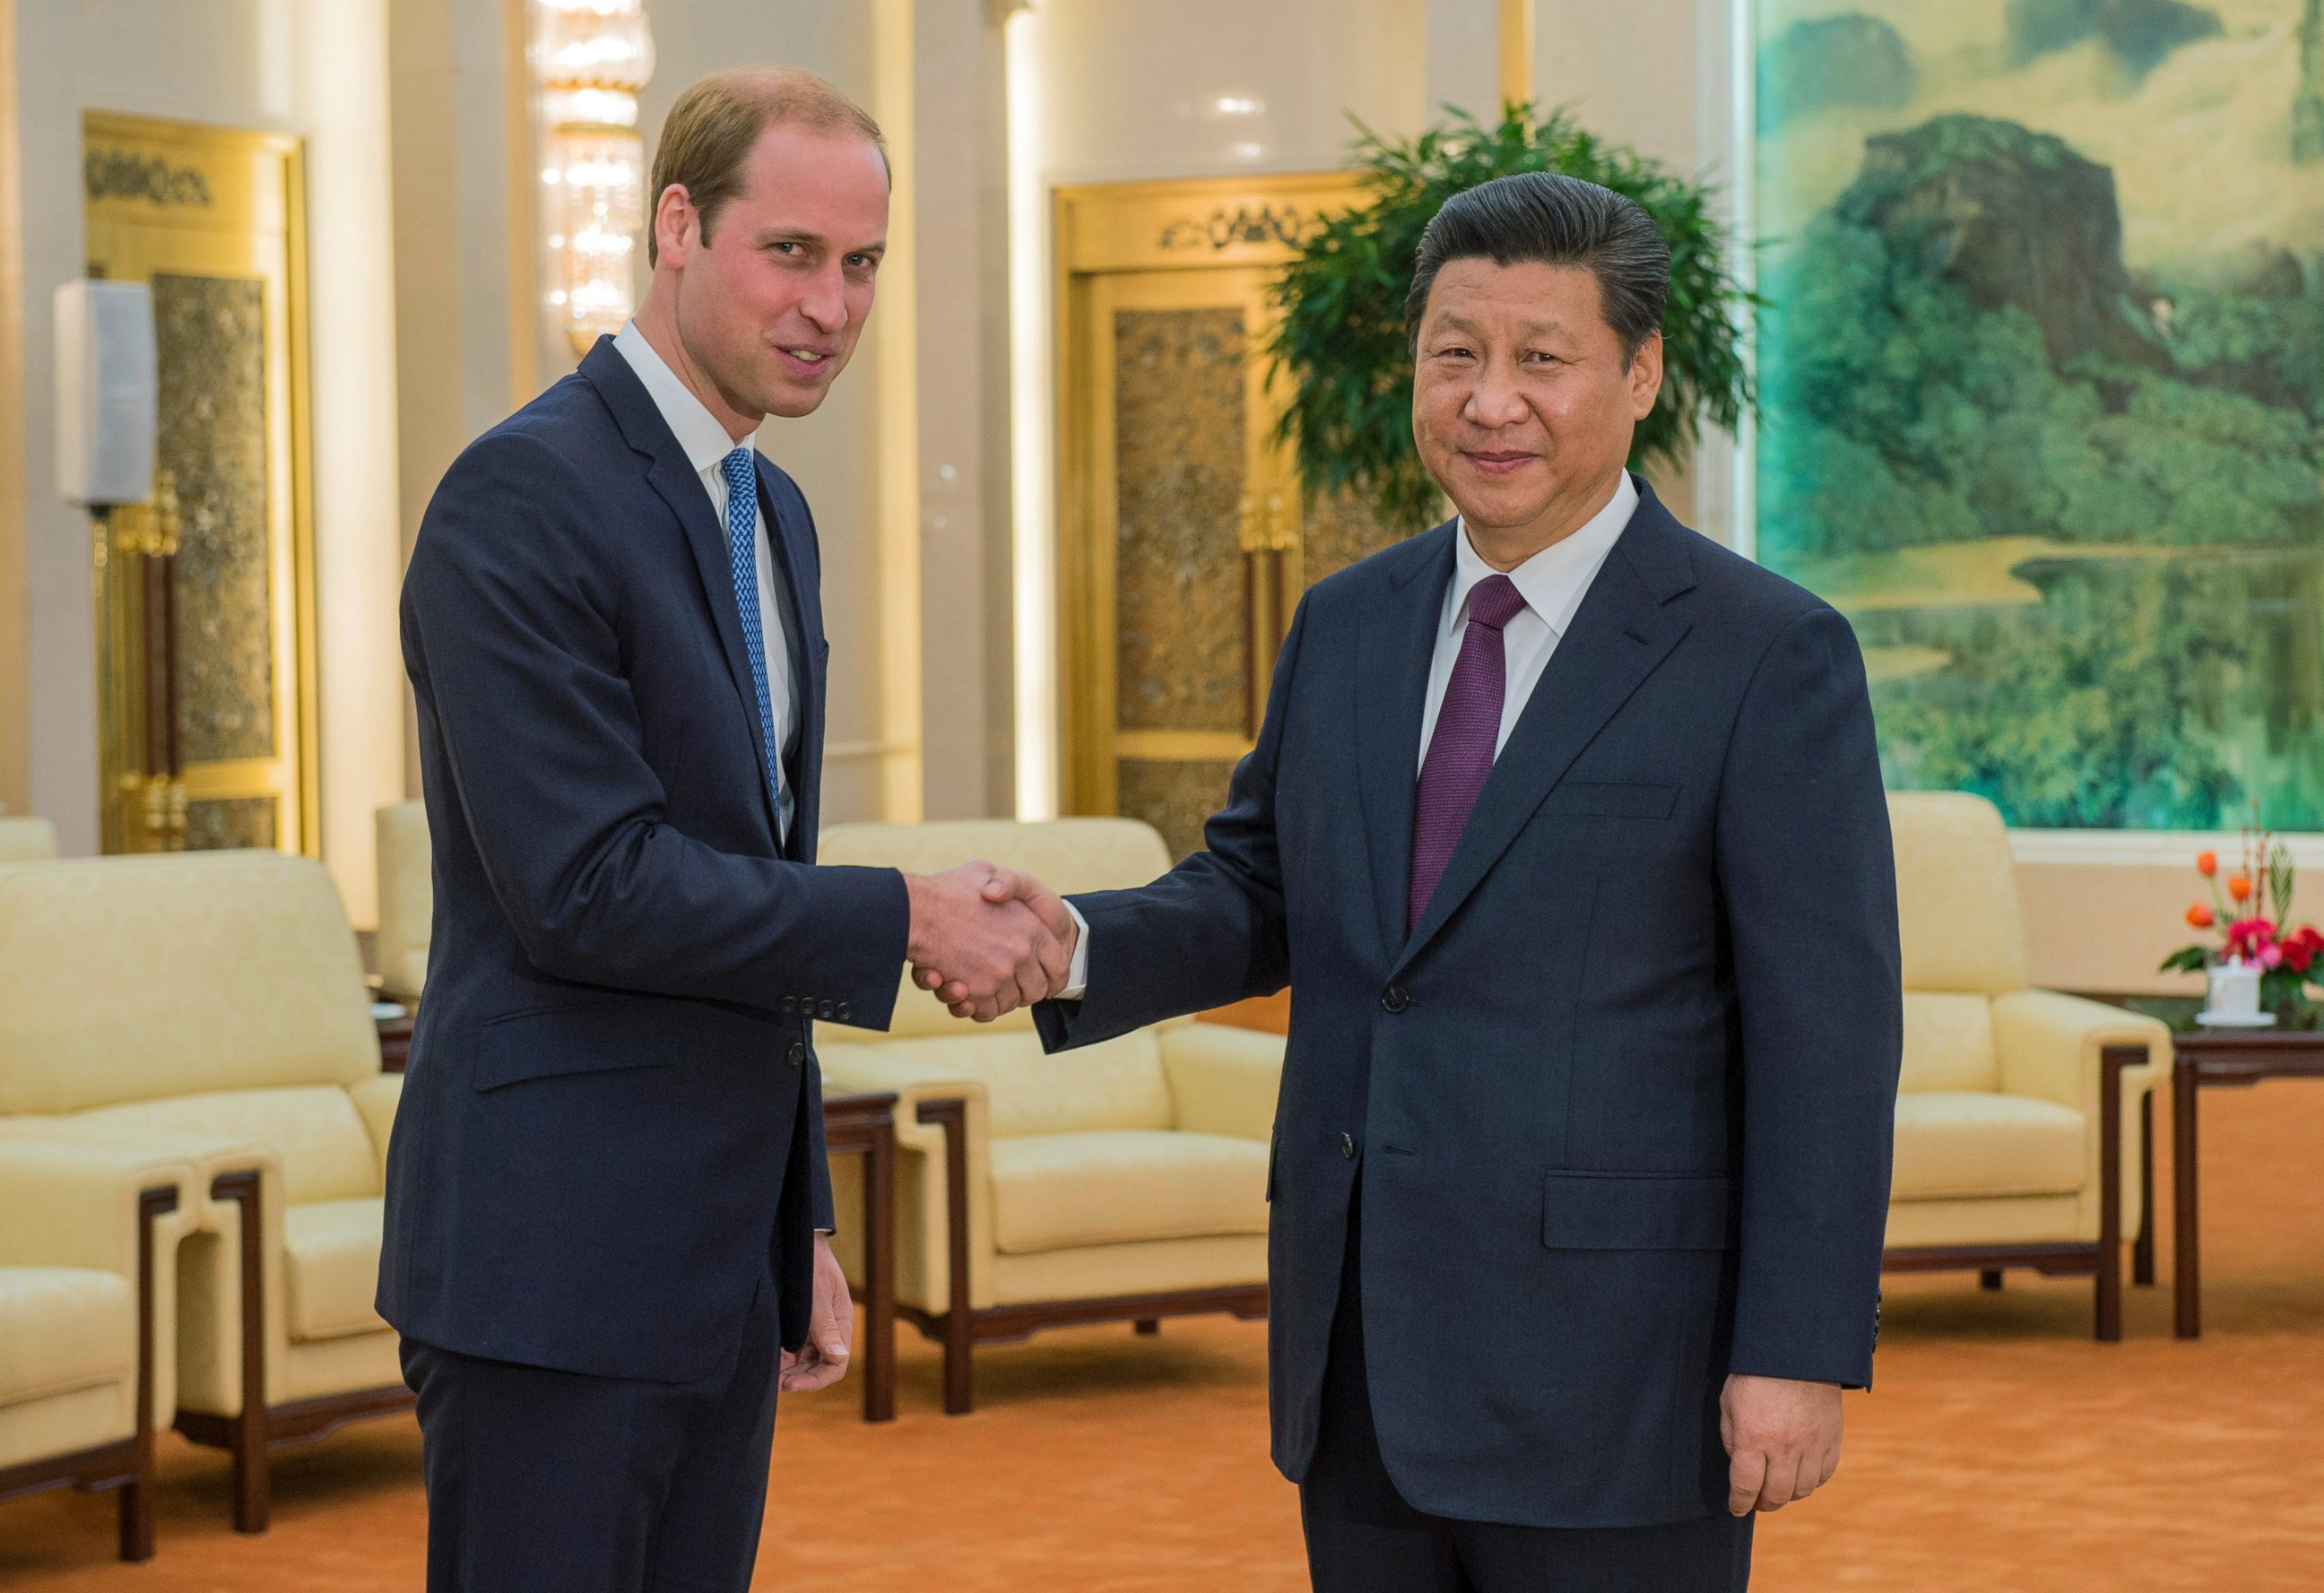 PHOTO: Prince William, Duke of Cambridge meets with Chinese President Xi Jinping at the Great Hall of the People, March 2, 2015 in Beijing.